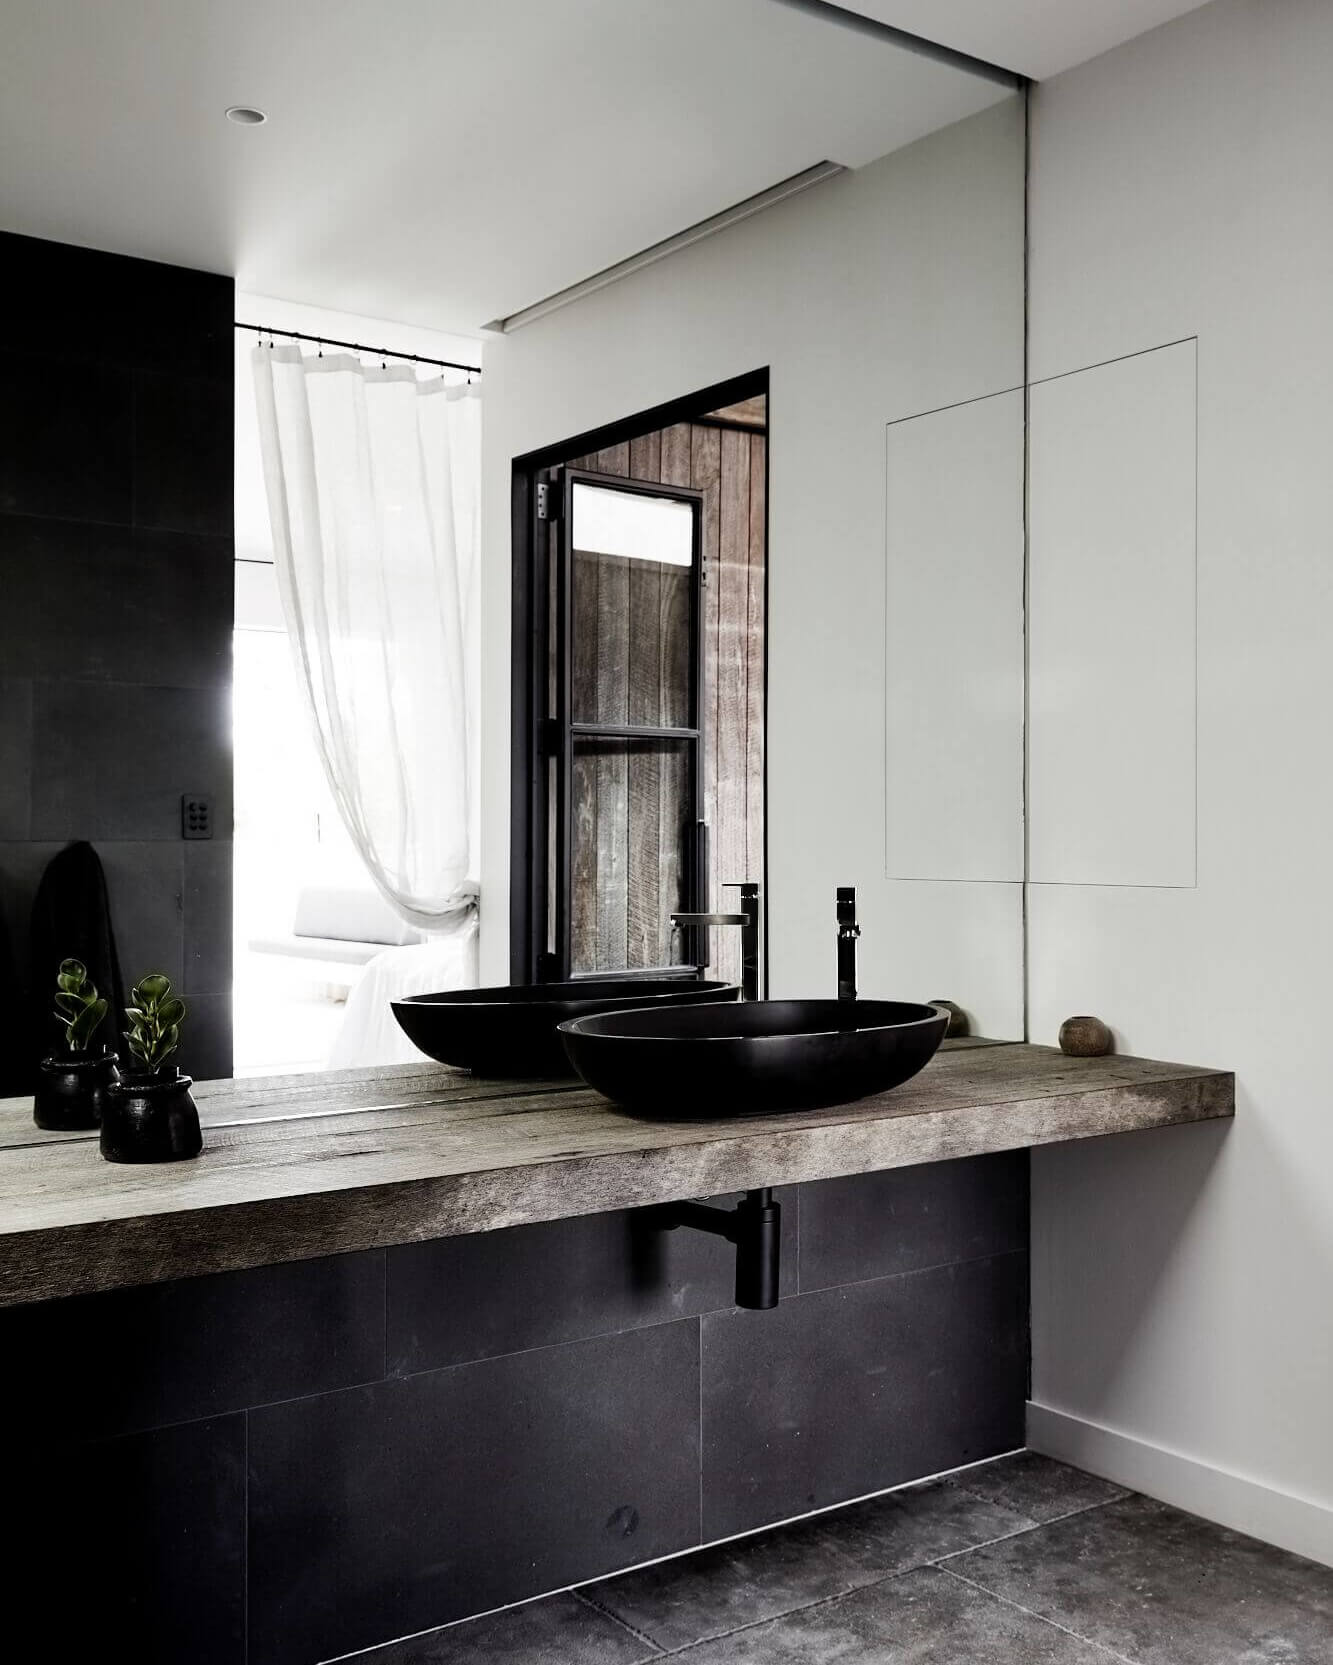 Ensuite The Cabin, Byron Beach Abodes with black vanity bowl and timber vanity